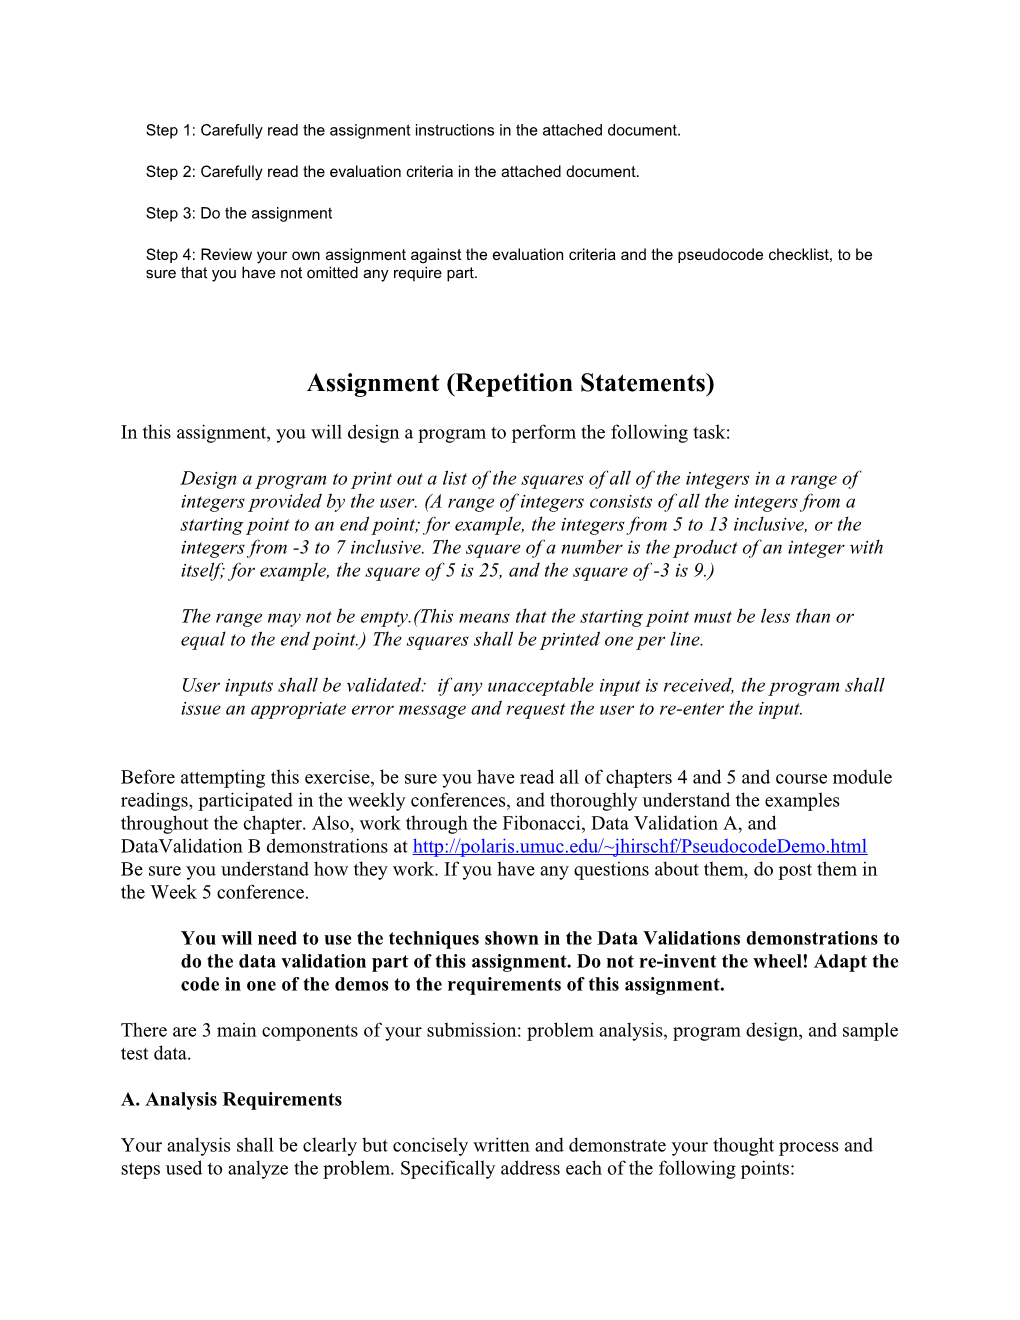 Assignment 3 (Repetition Statements) for Sections 7982 and 7986